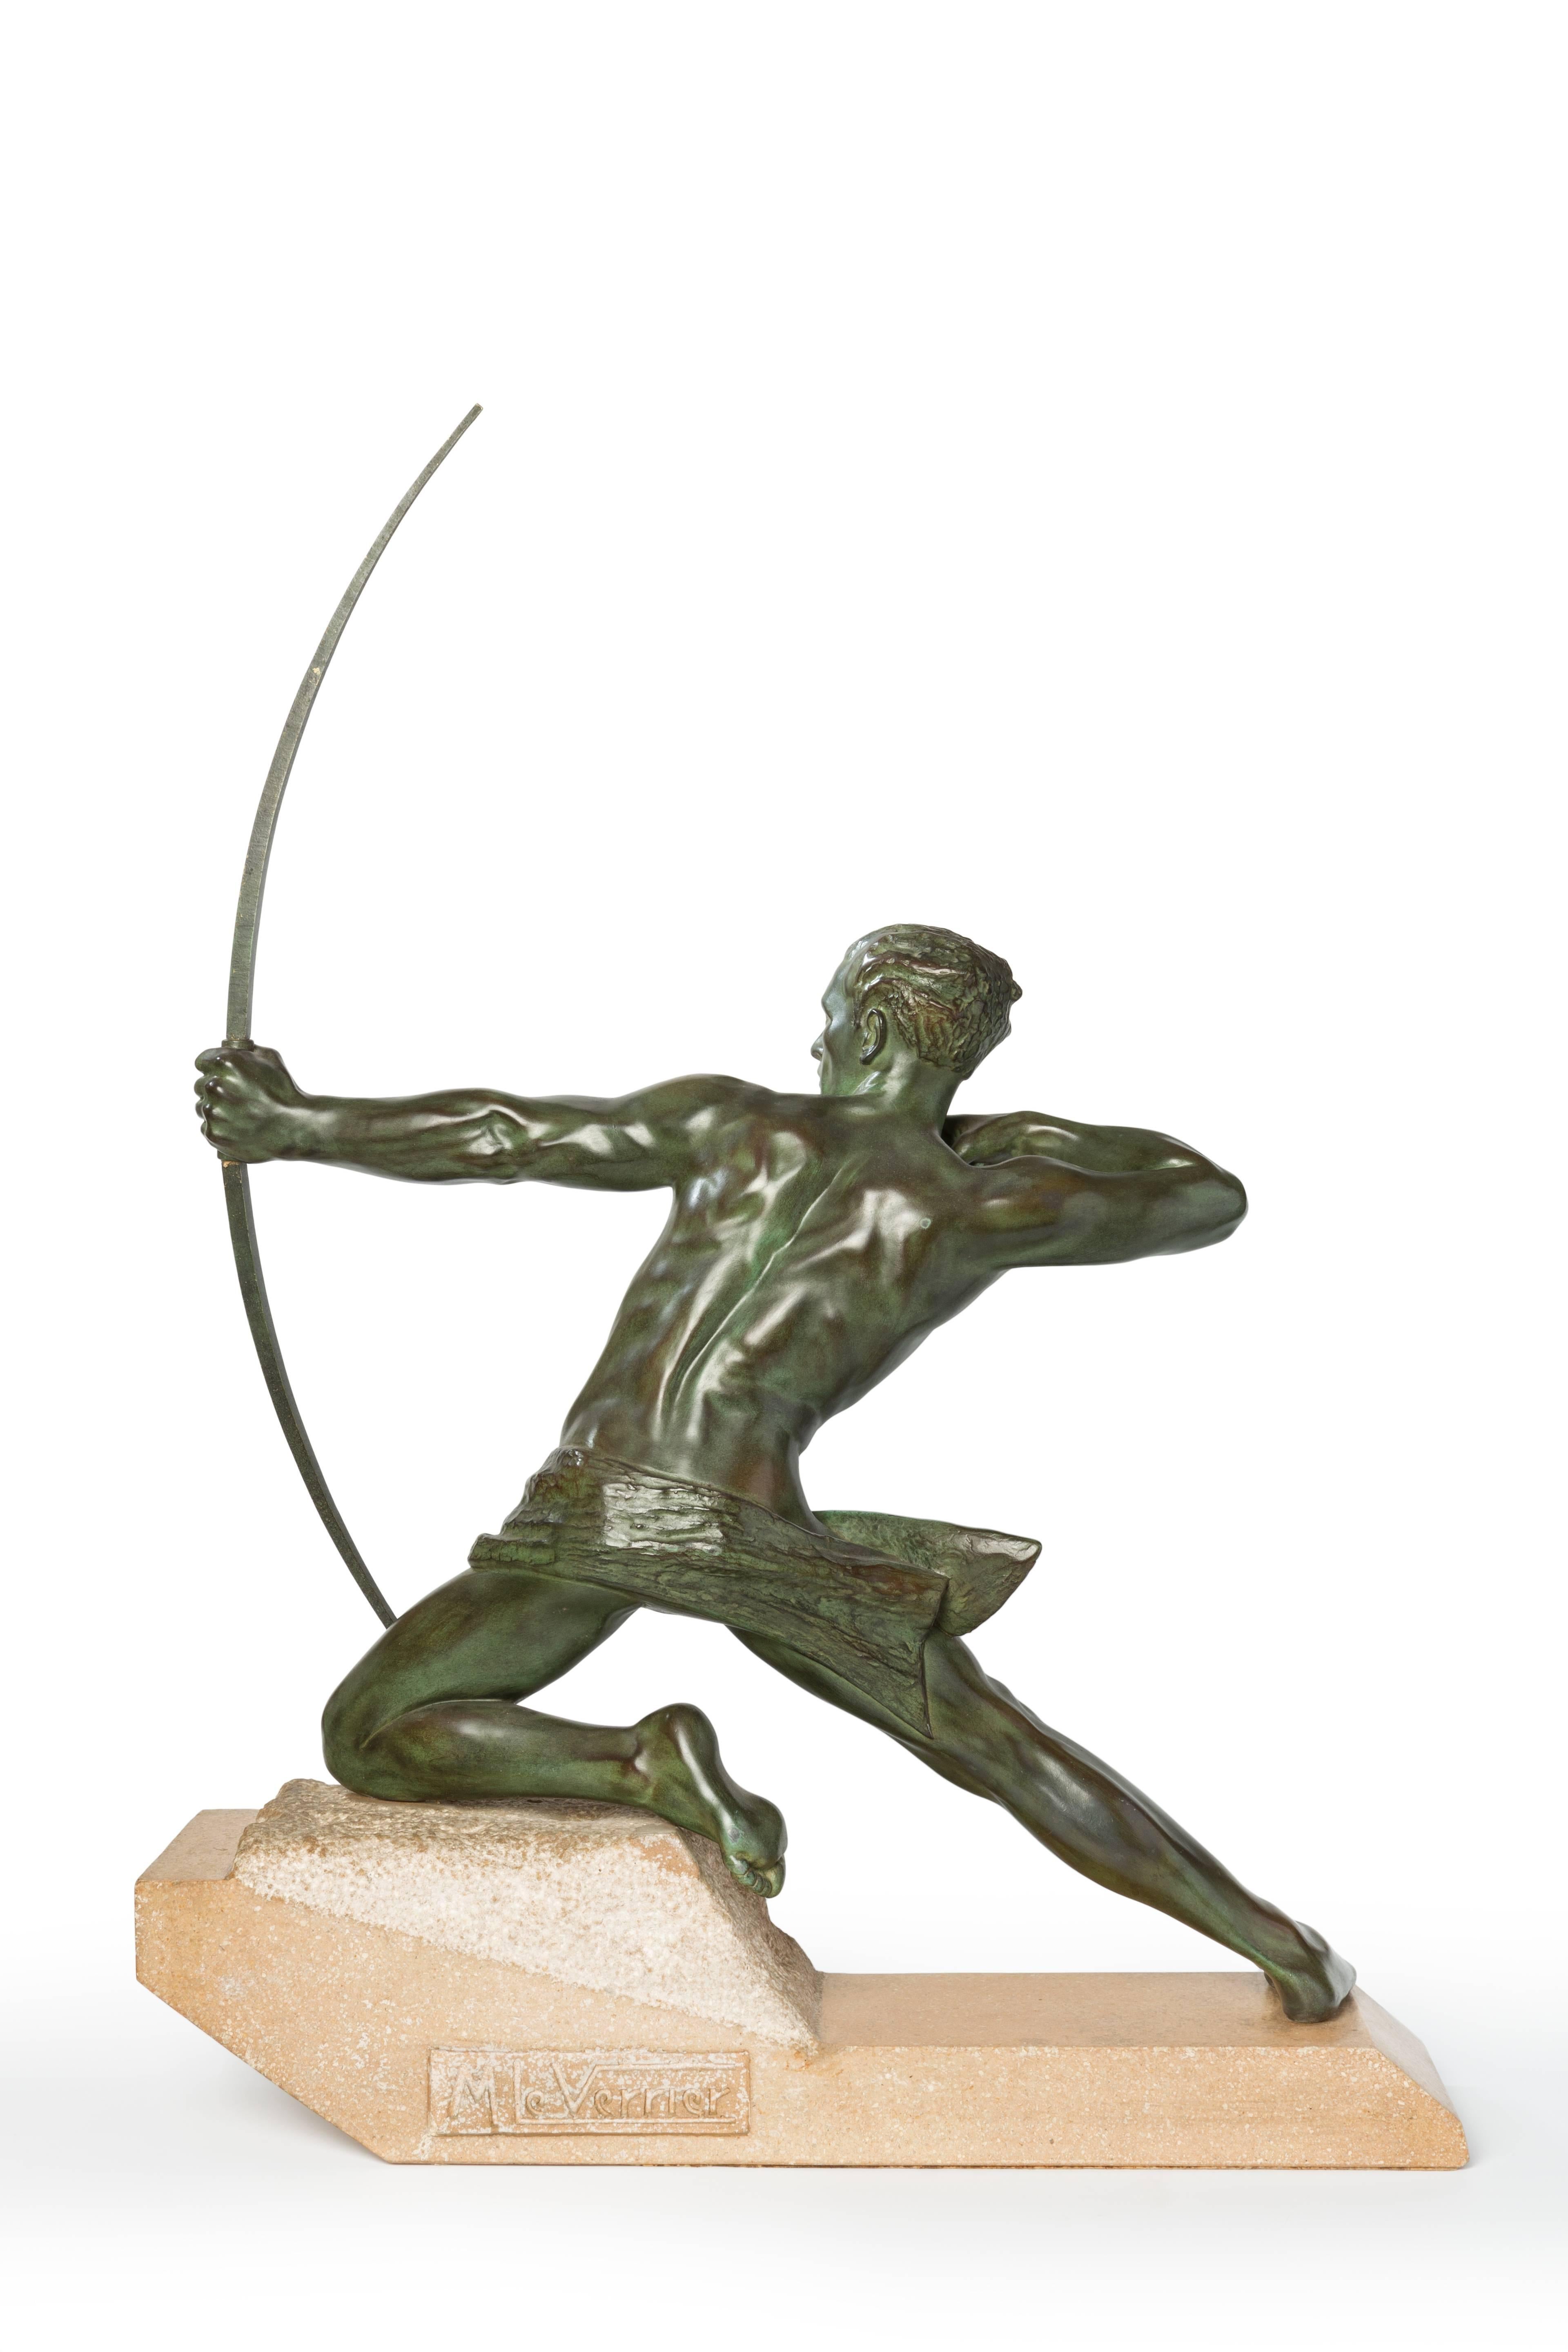 French Art Deco sculpture by Max Le Verrier ( 1891-1973 ). Bronze green patinated on granite base. Signed on the base: M. Le Verrier.
Measurements: Height: 29.92 in ( 76 cm ), Width: 22.44 in ( 57 cm ), Depth: 6.1 in ( 15,5 cm )